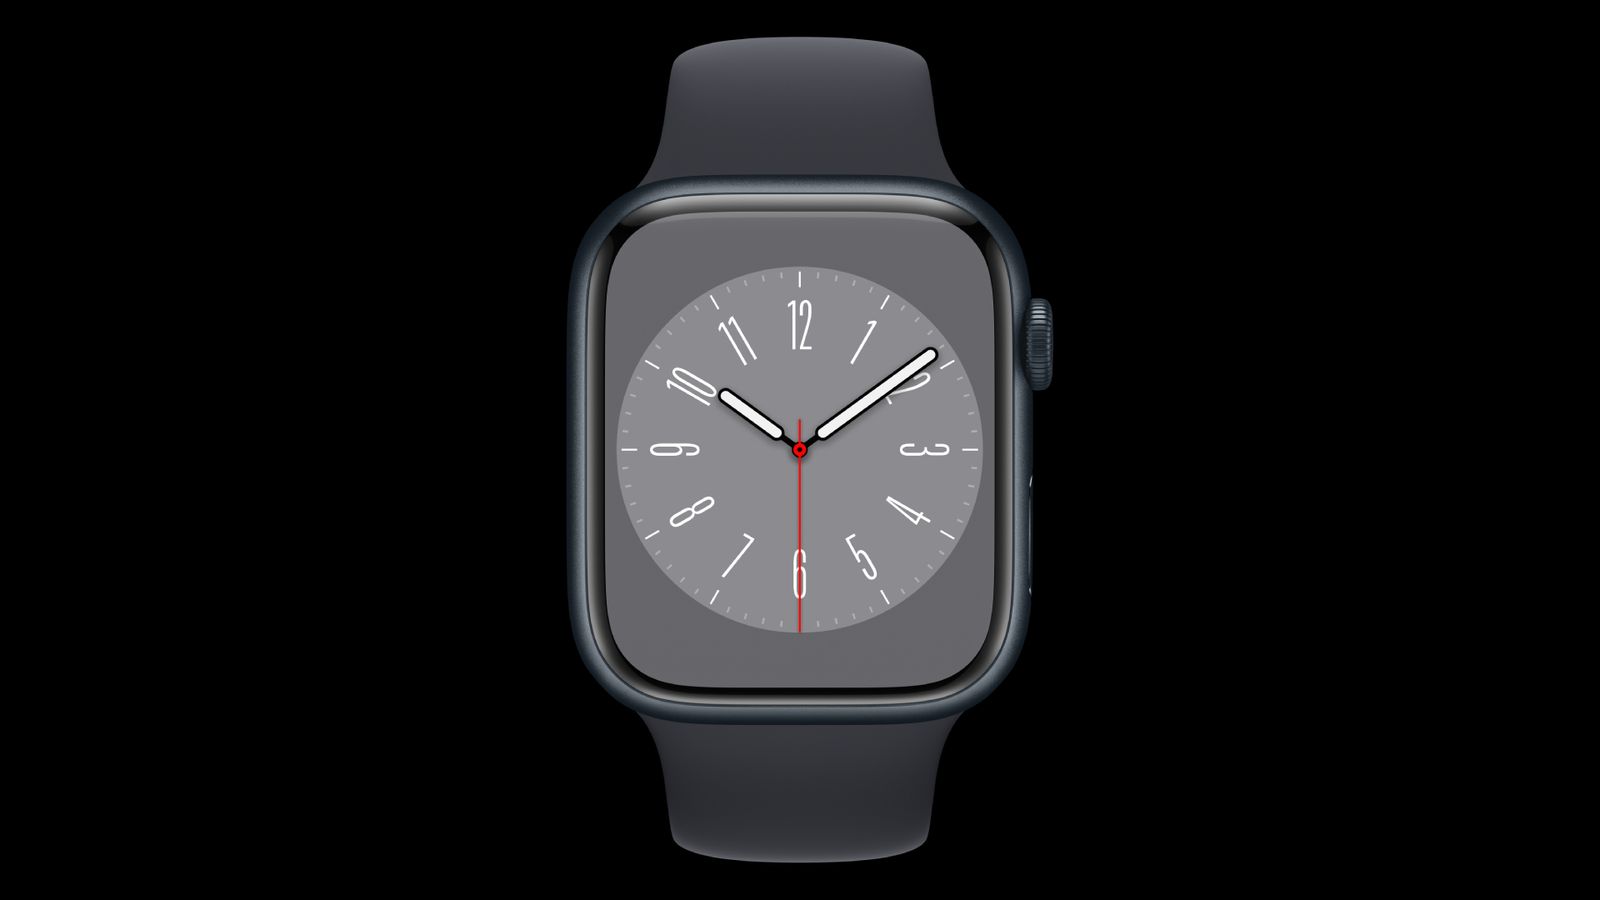 Apple Watch Series 8 product image of a black smartwatch with a grey analogue clock on the face.